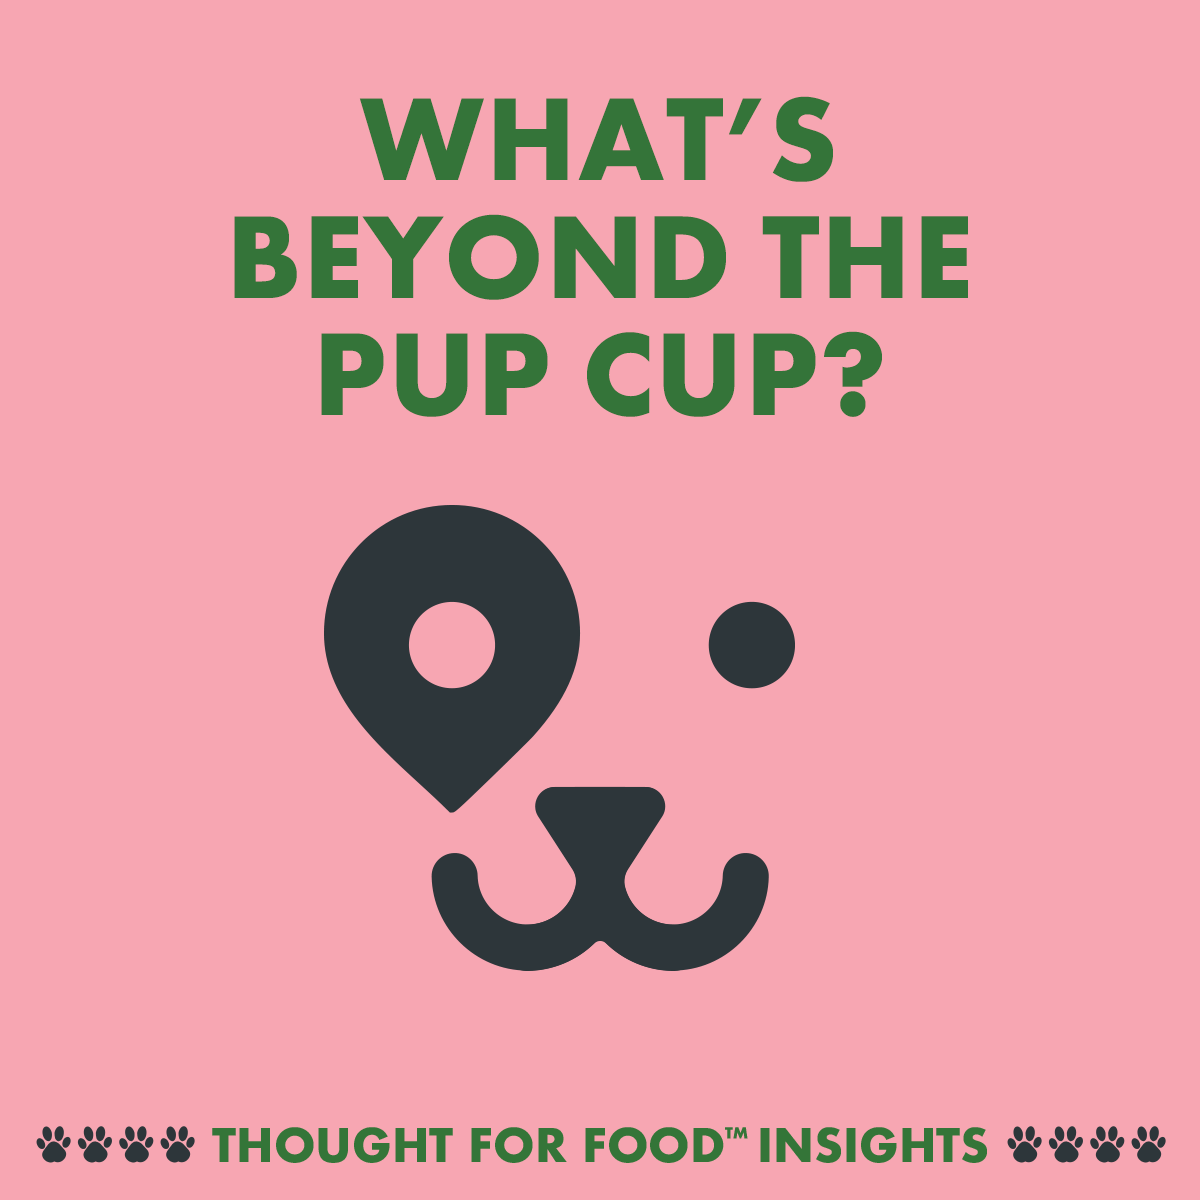 What's beyond the pup cup?